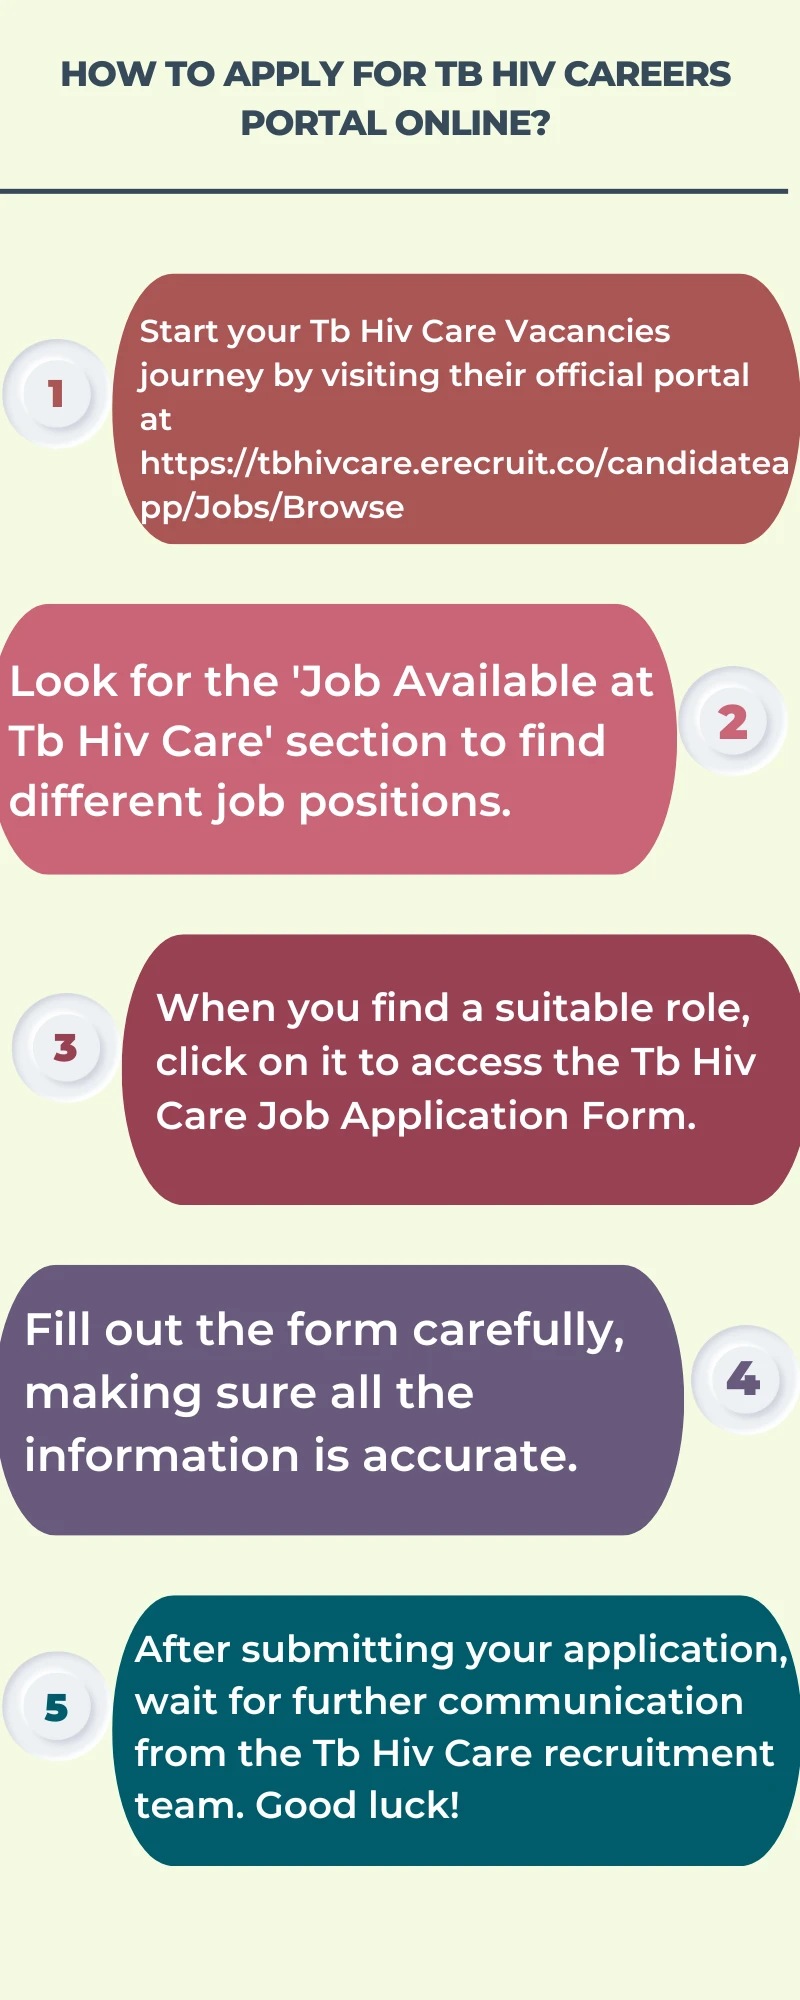 How To Apply for Tb HIV Careers Portal Online?